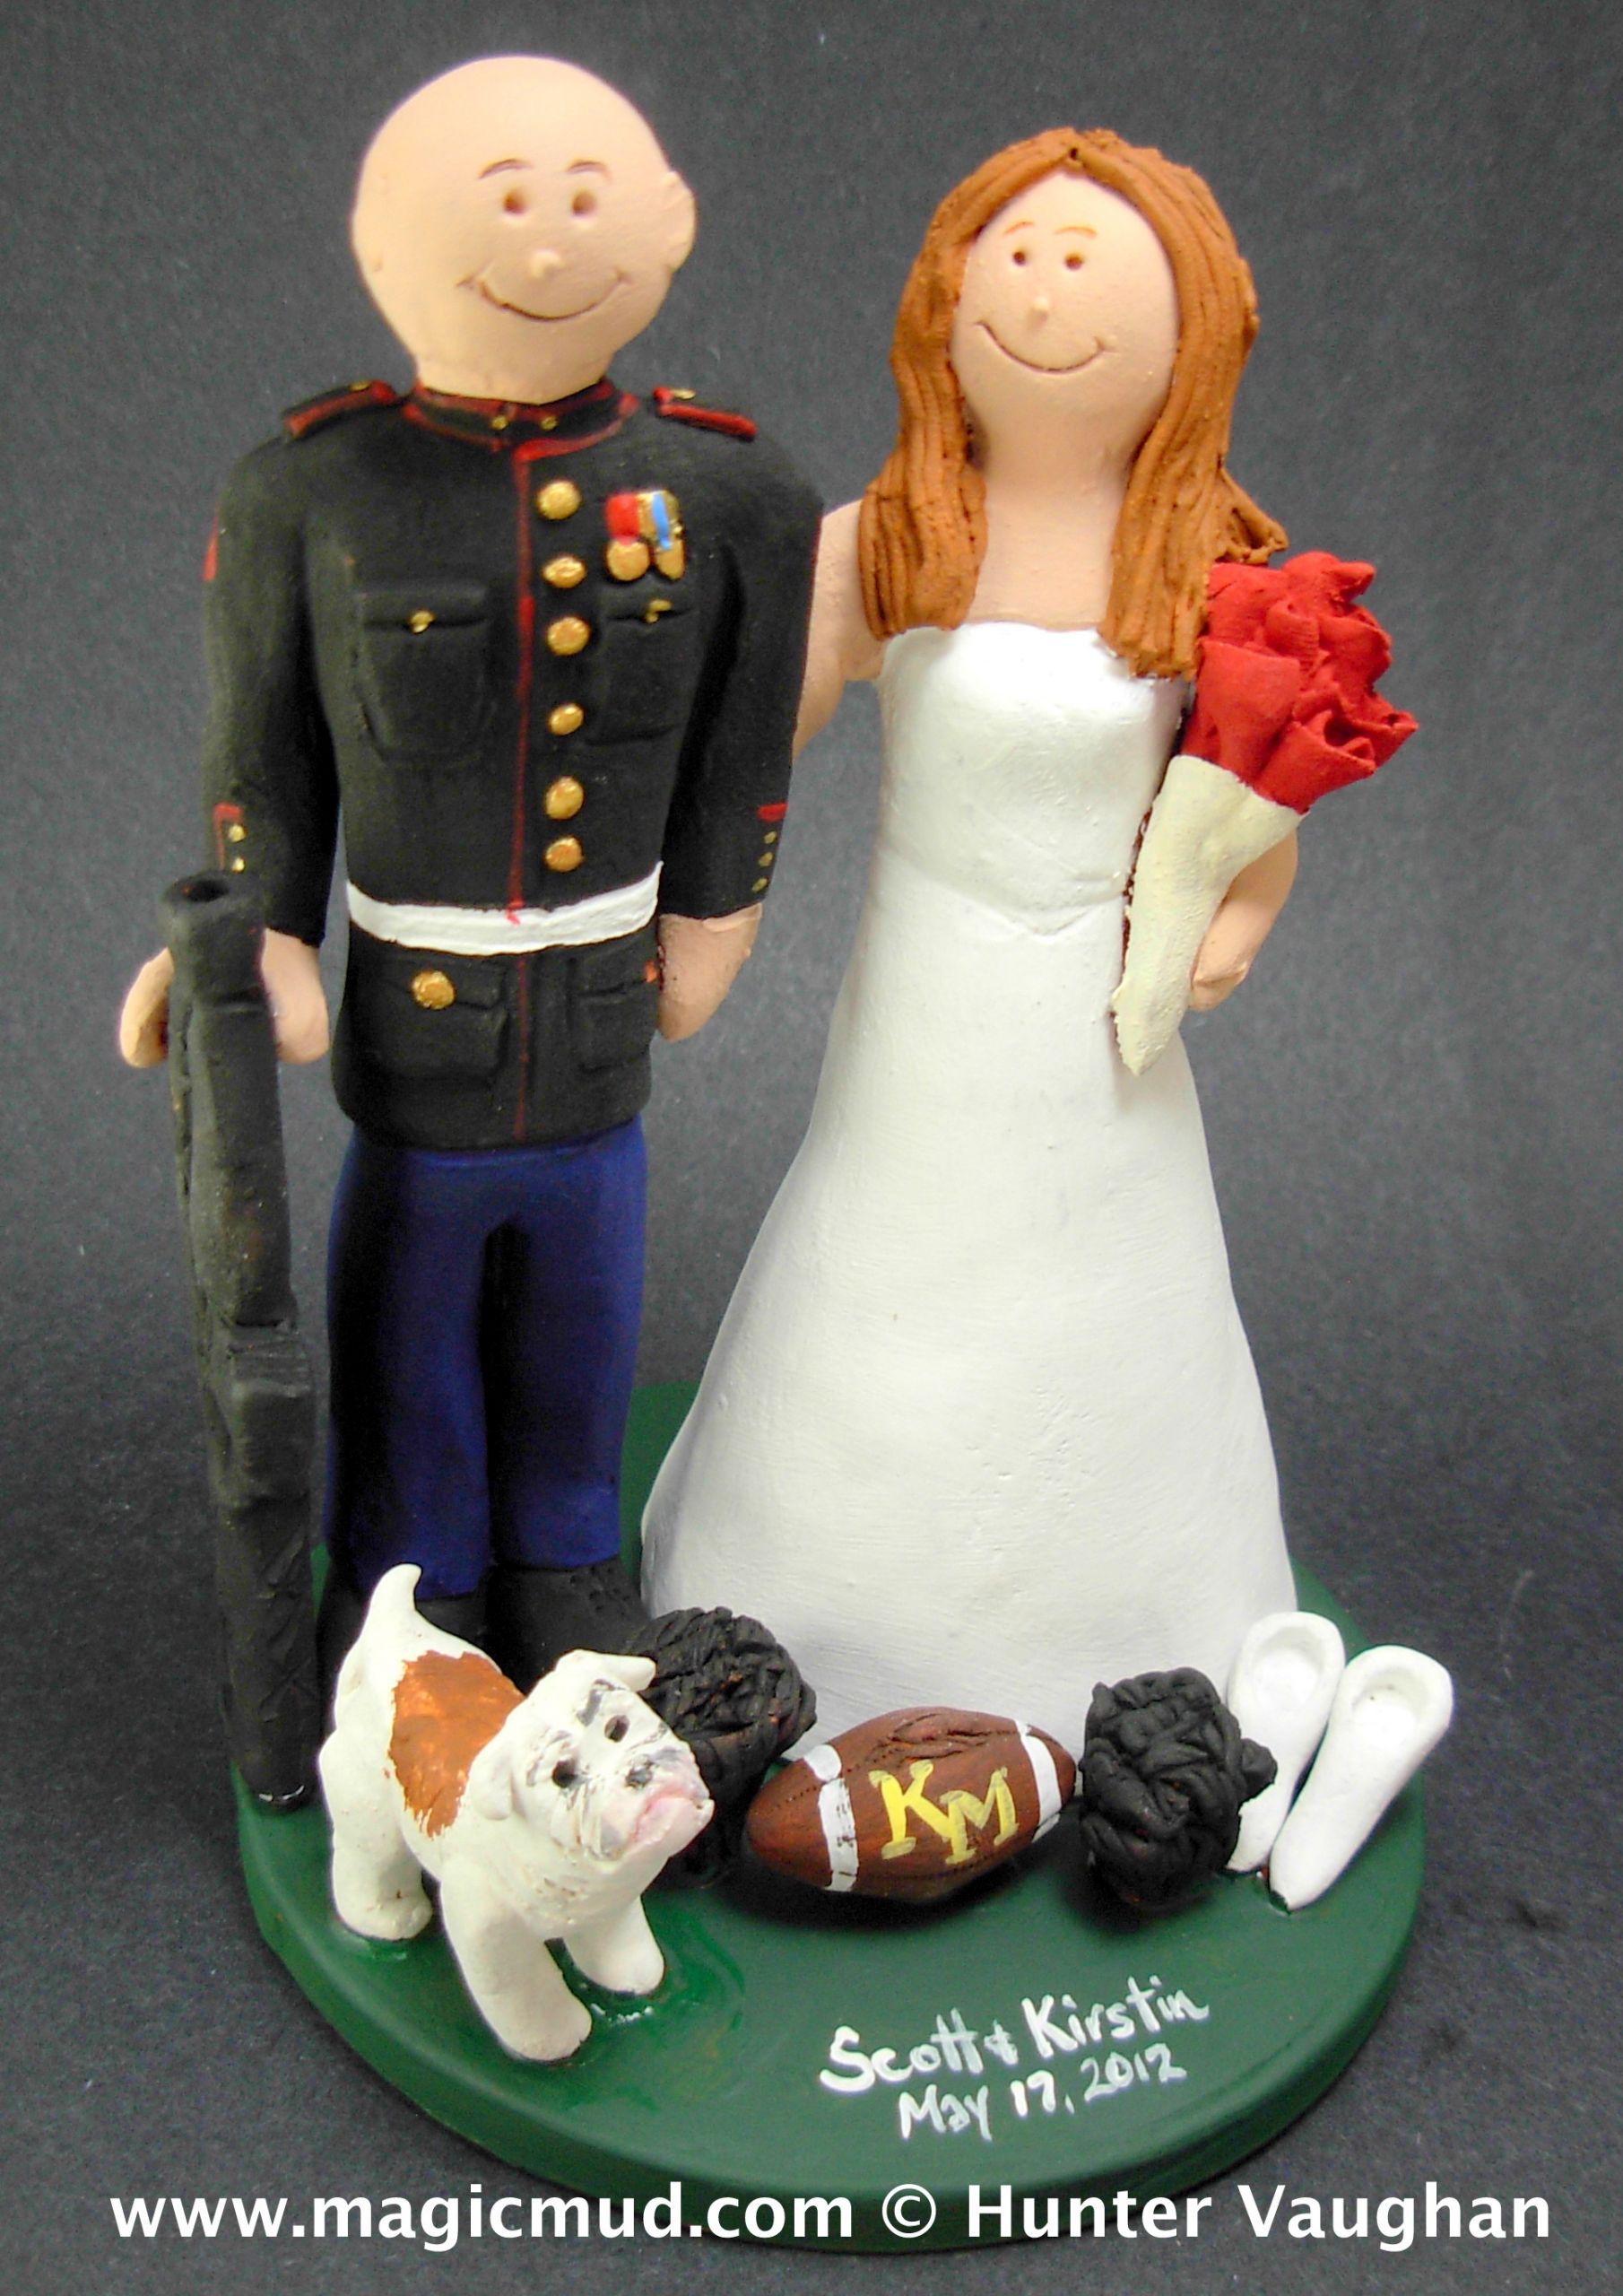 Military Wedding Cake Toppers Unique Military Wedding Cake Toppers Of Military Wedding Cake Toppers Scaled 